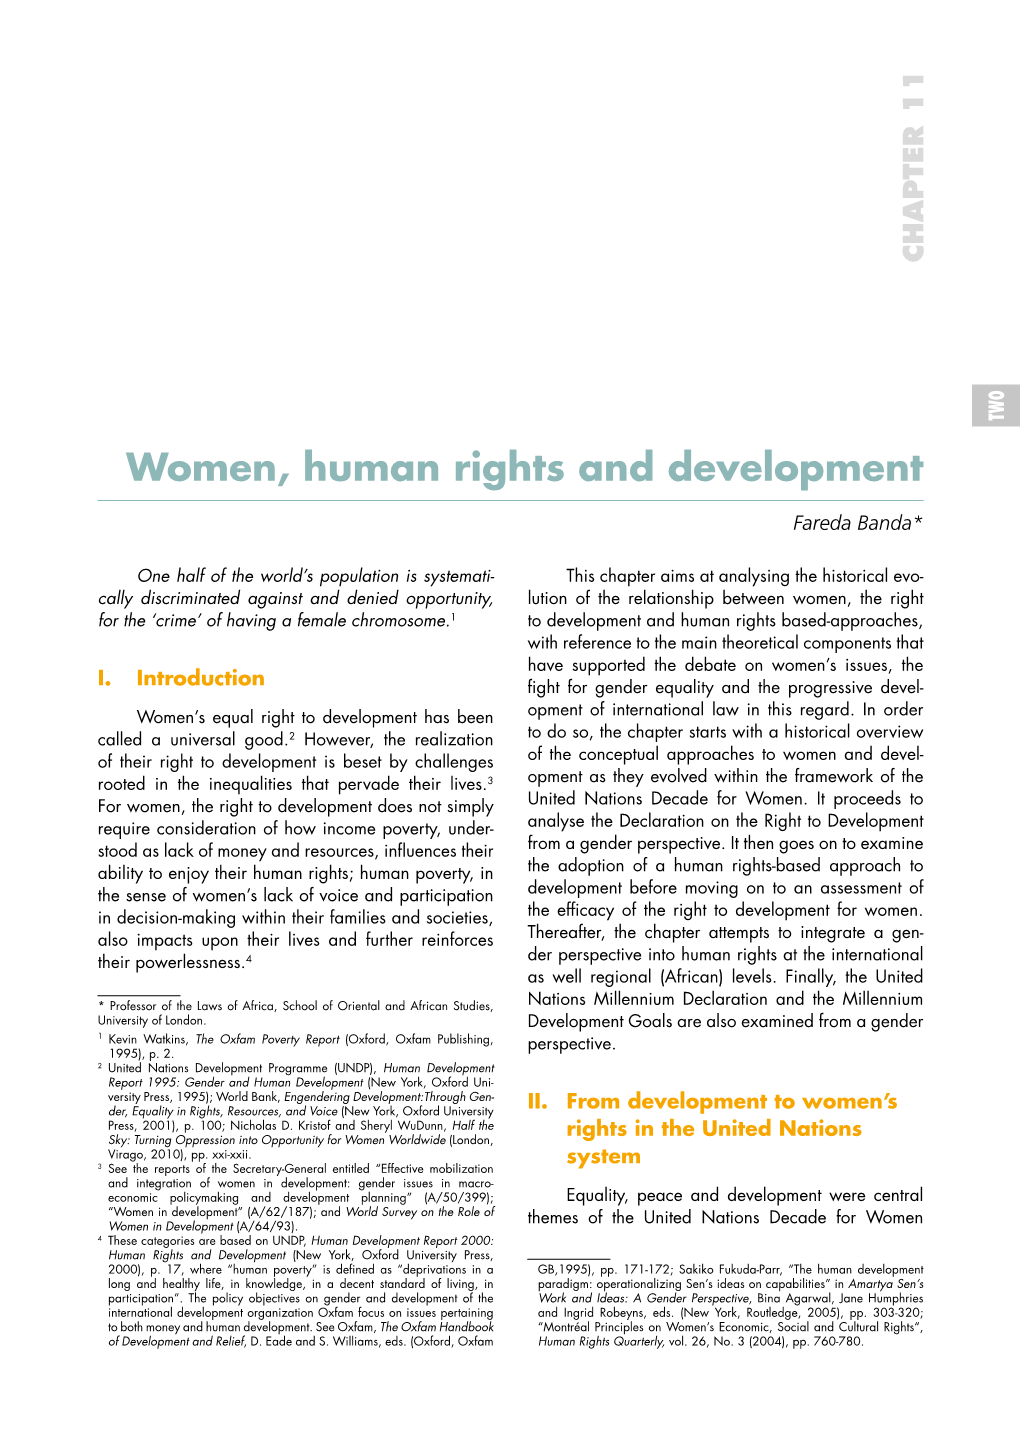 Women, Human Rights and Development | PART TWO 151